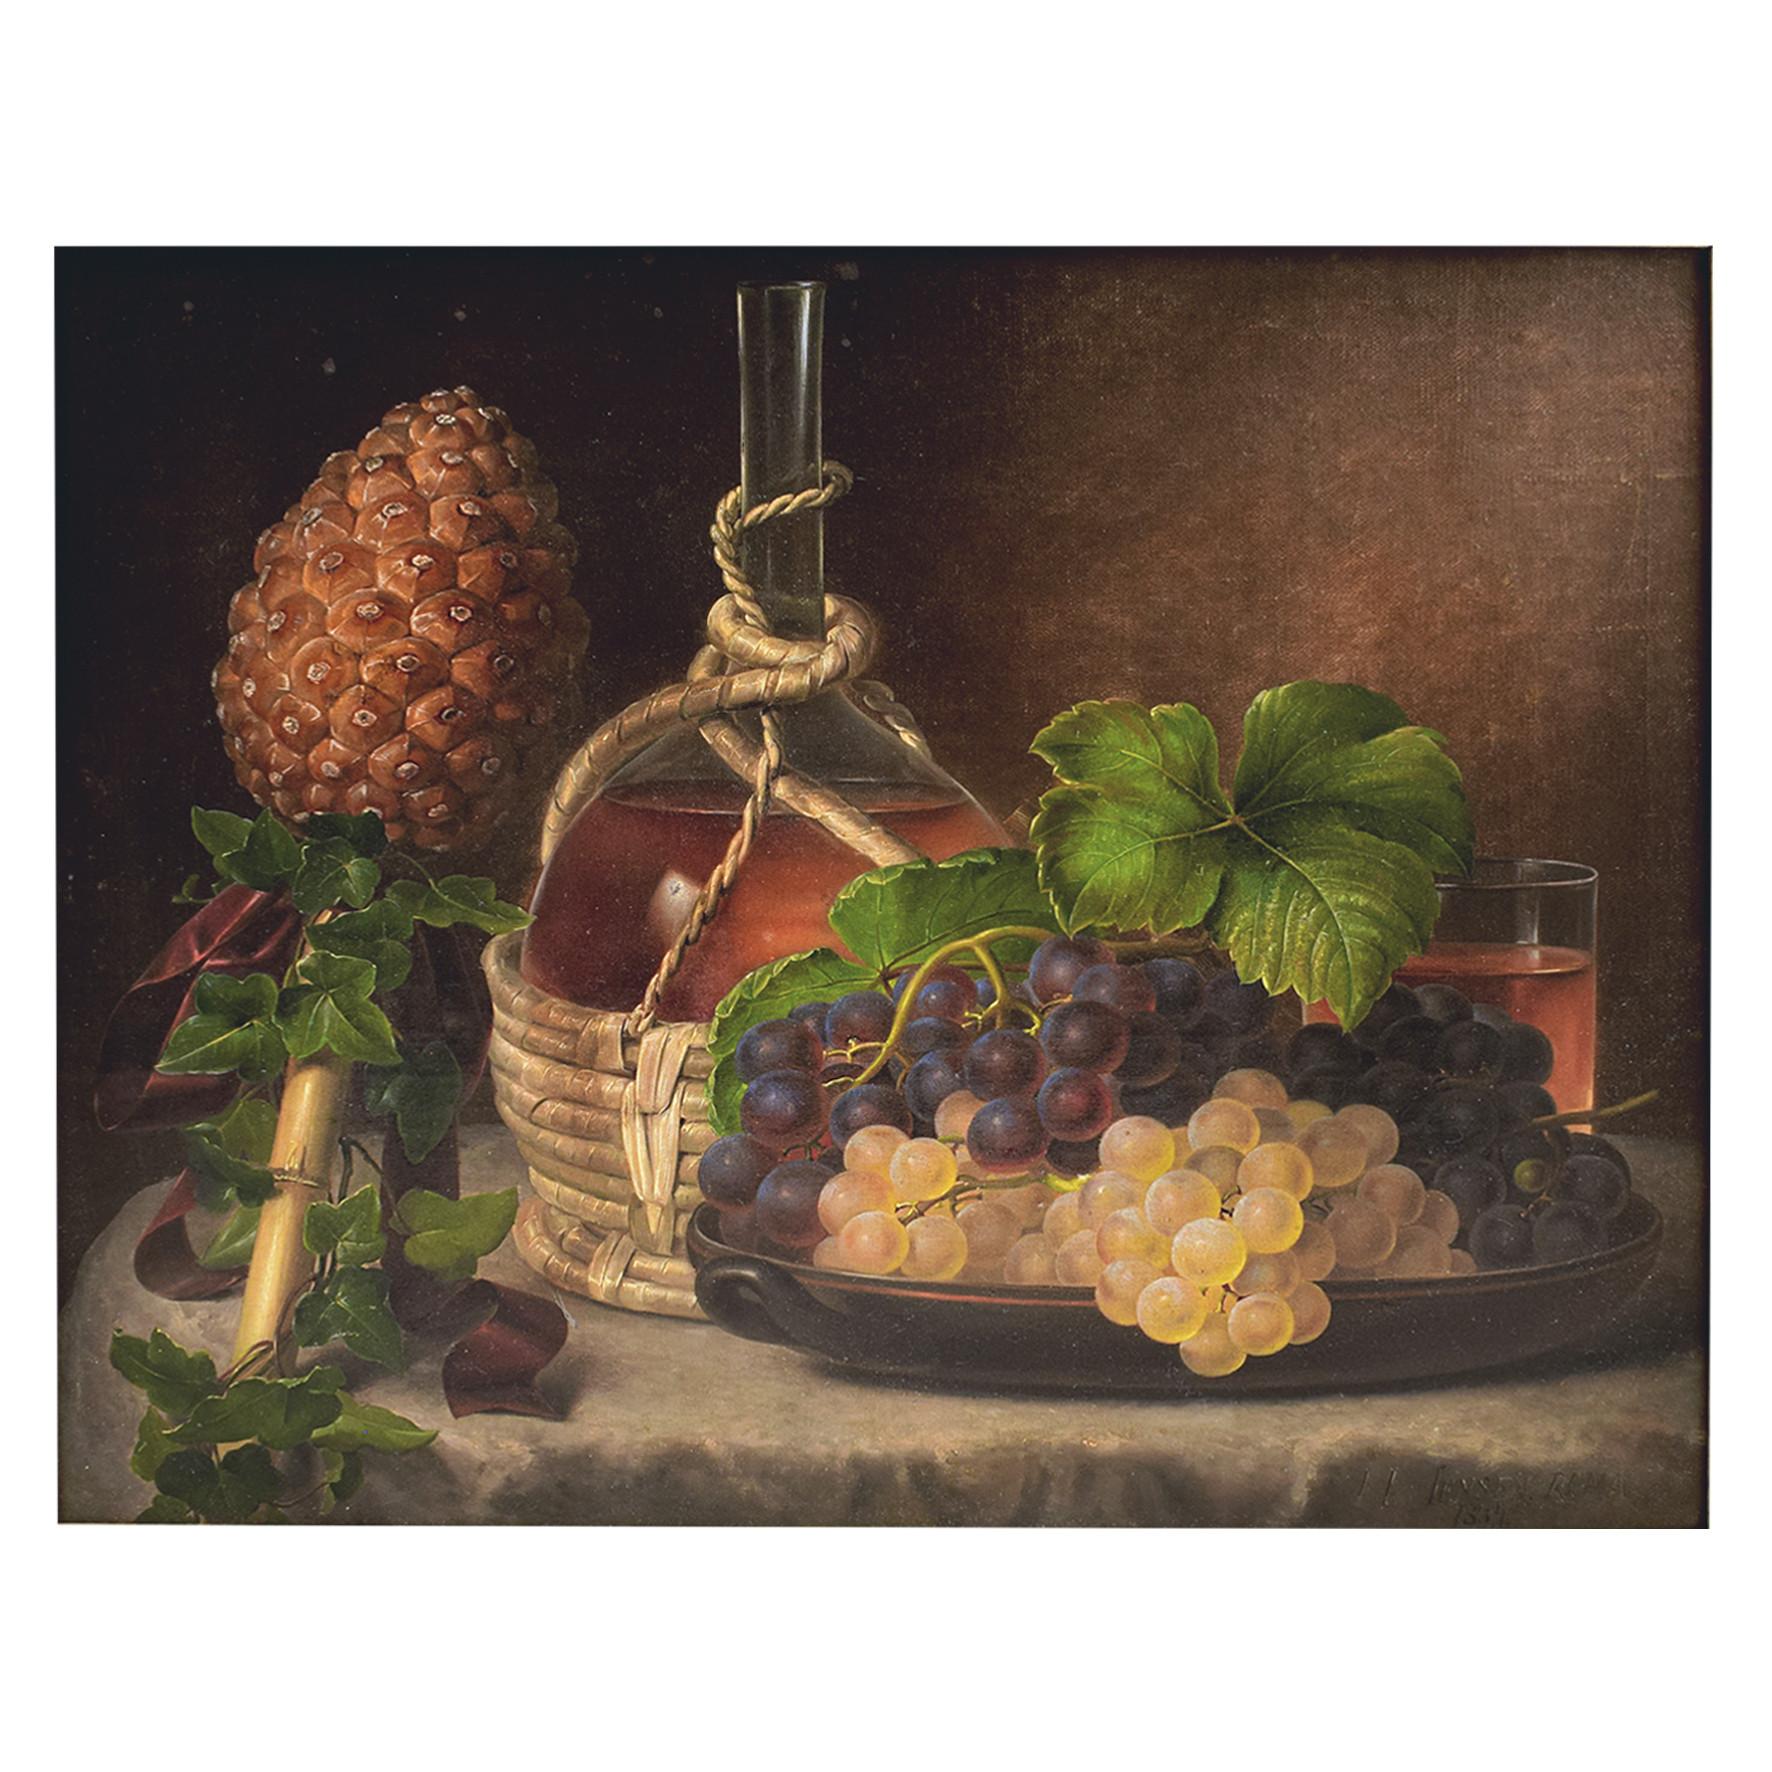 I.L. Jensen, 1800-1856.
Still Life with grapes, wine, pine cone and ivy on a table. Silver frame.
Signed I.L. Jensen Roma, 1834
Often referred to as ‘Blossom-Jensen’.
Jensen was the leading flower painter of the Danish Golden Age

Measures